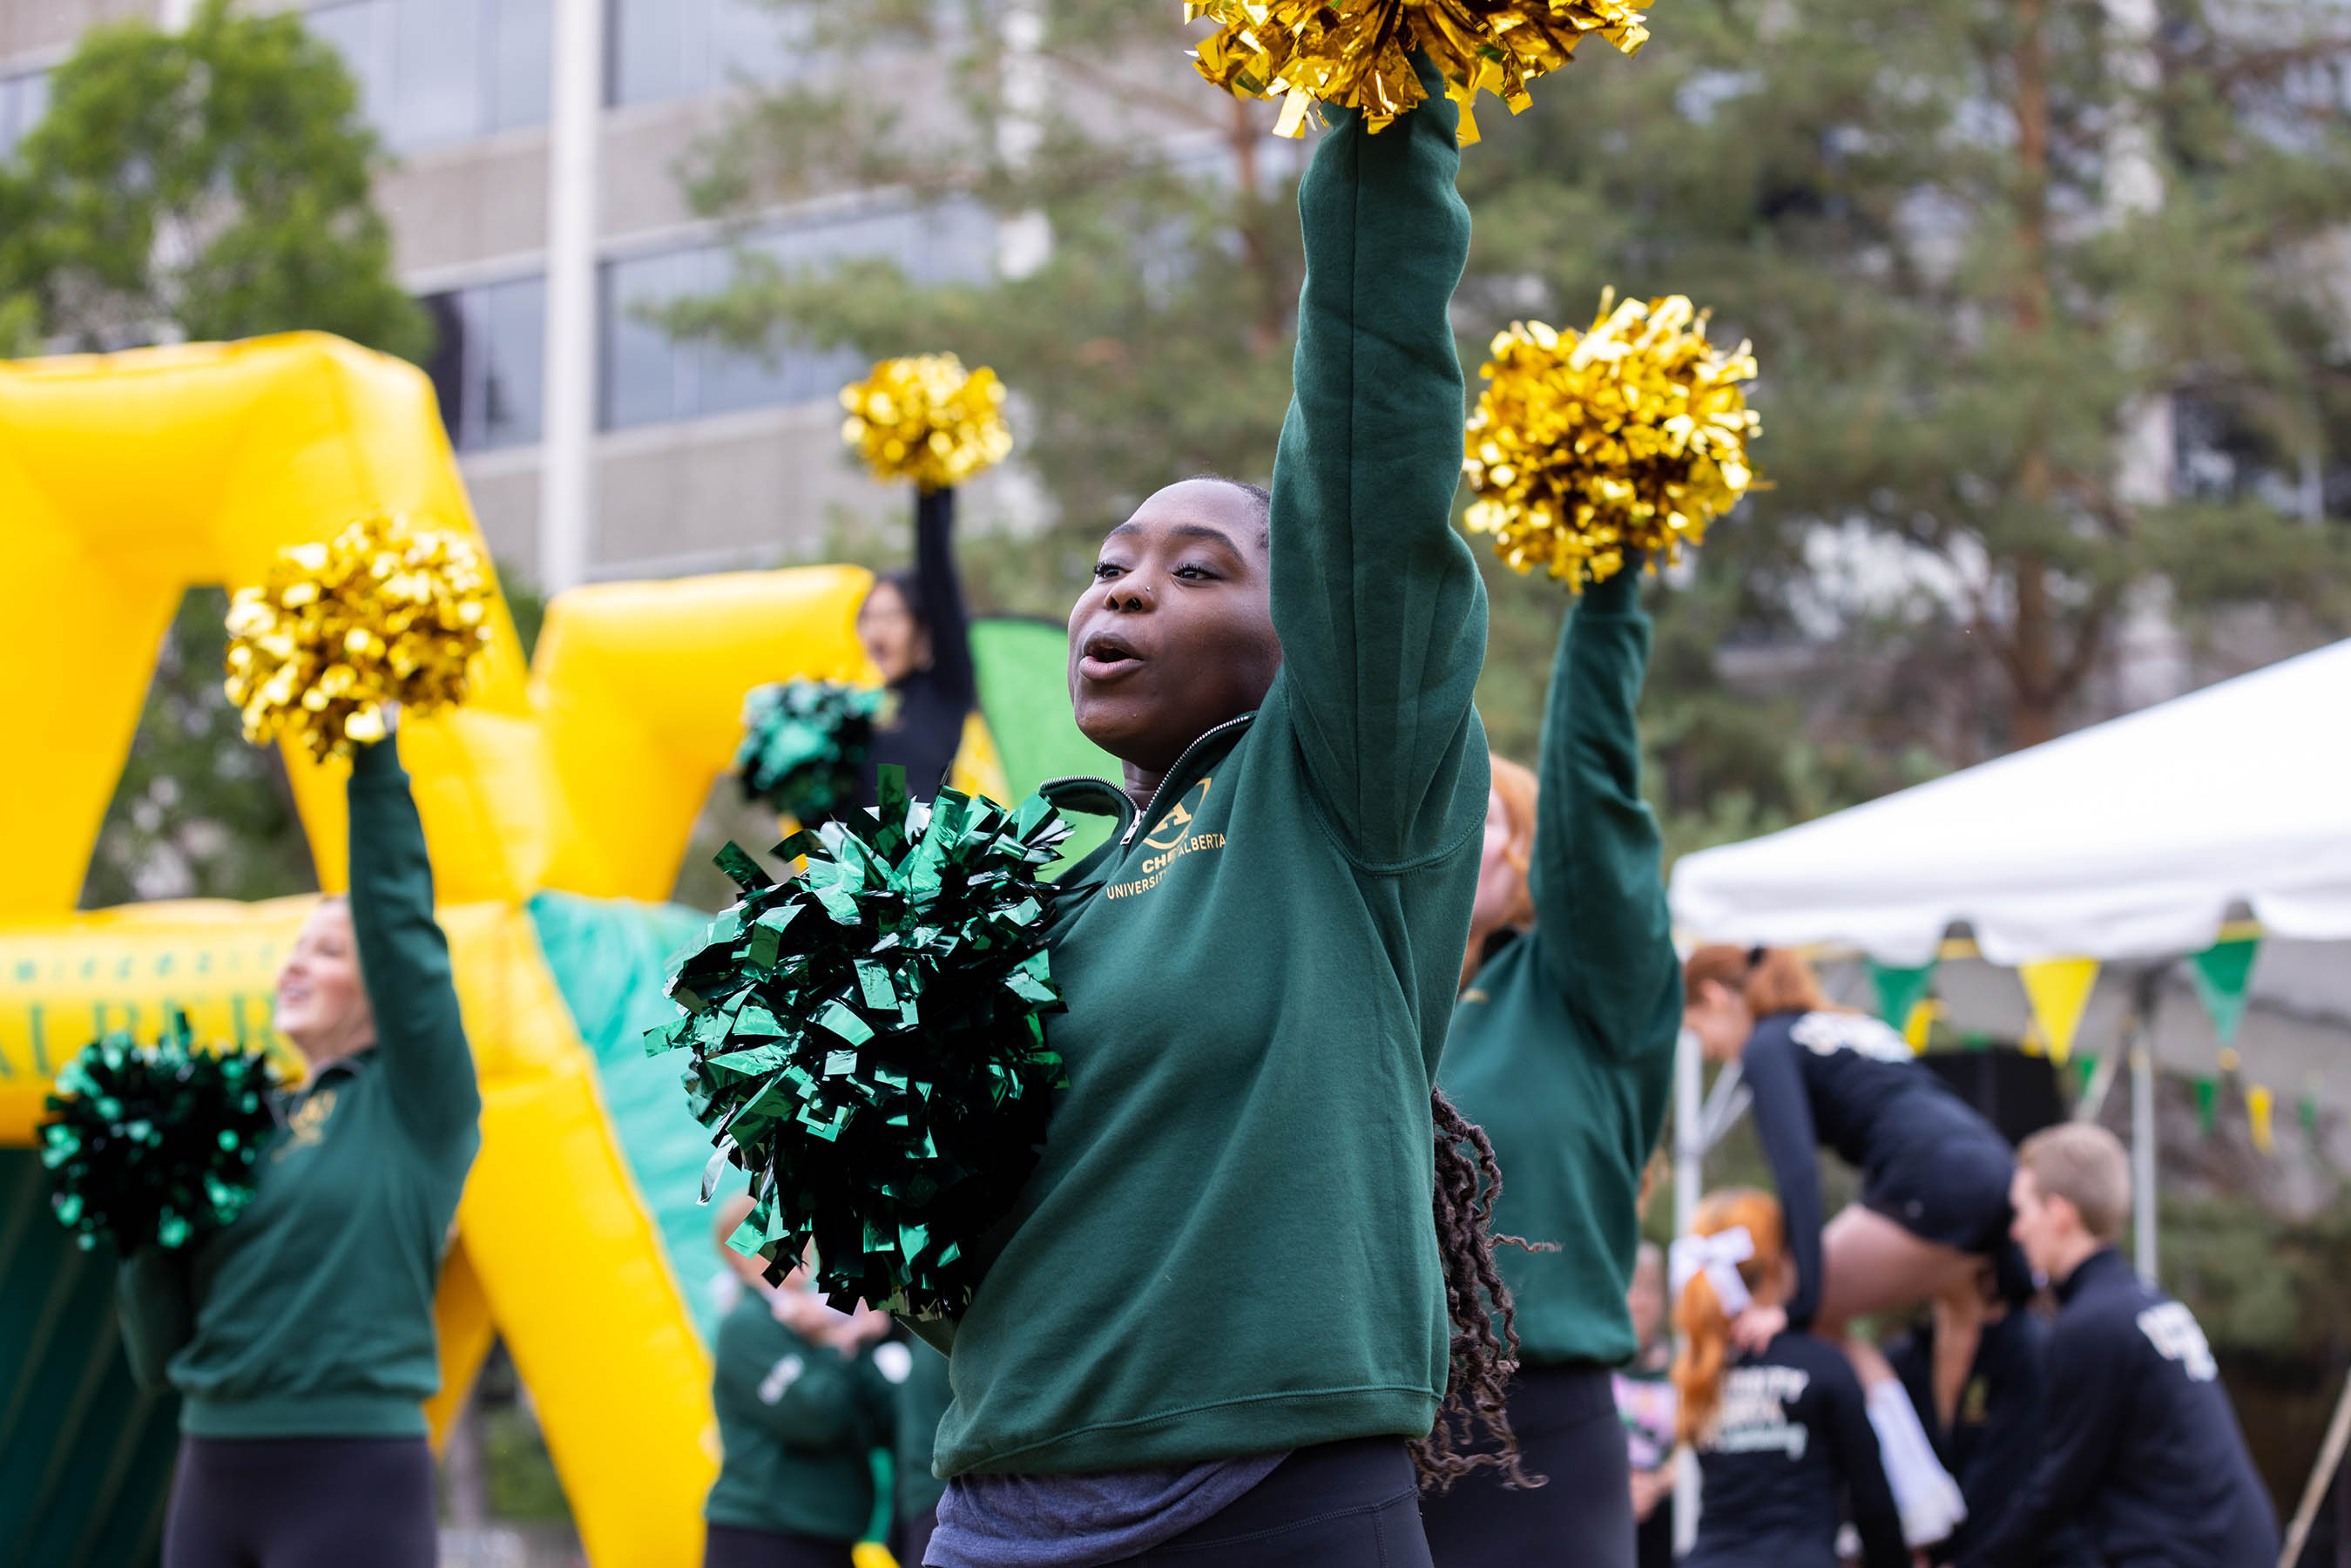 The University of Alberta Cheer team at the 2022 Green + Gold Day pep rally